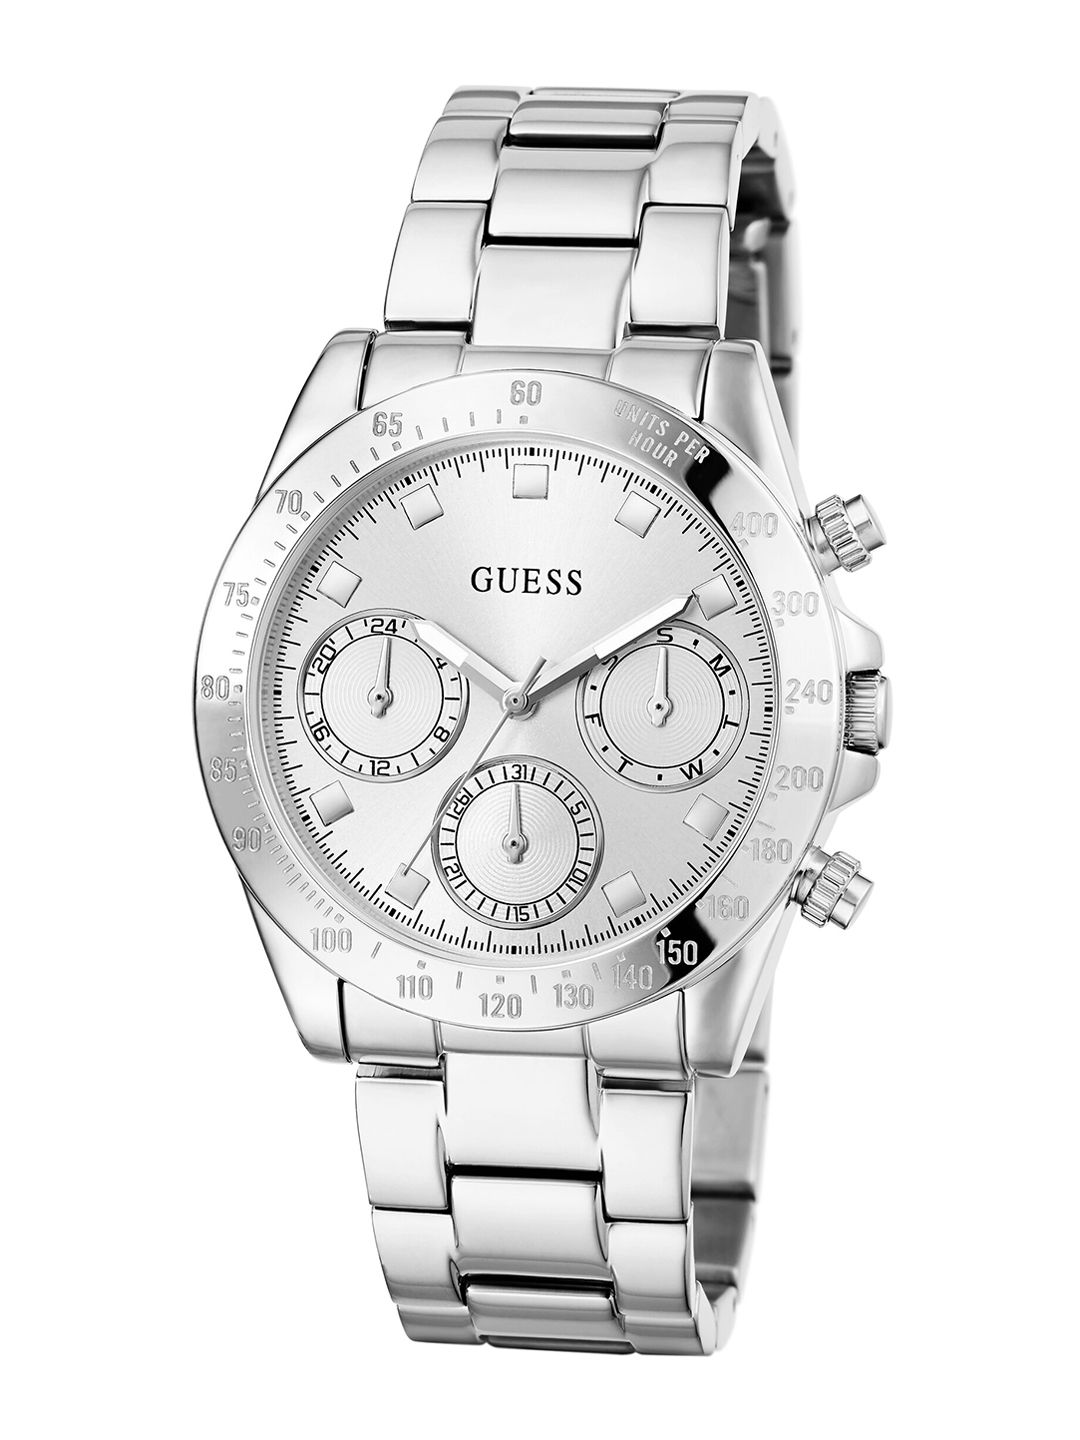 GUESS Women Silver-Toned Dial & Silver Toned Straps Analogue Watch GW0314L1 Price in India